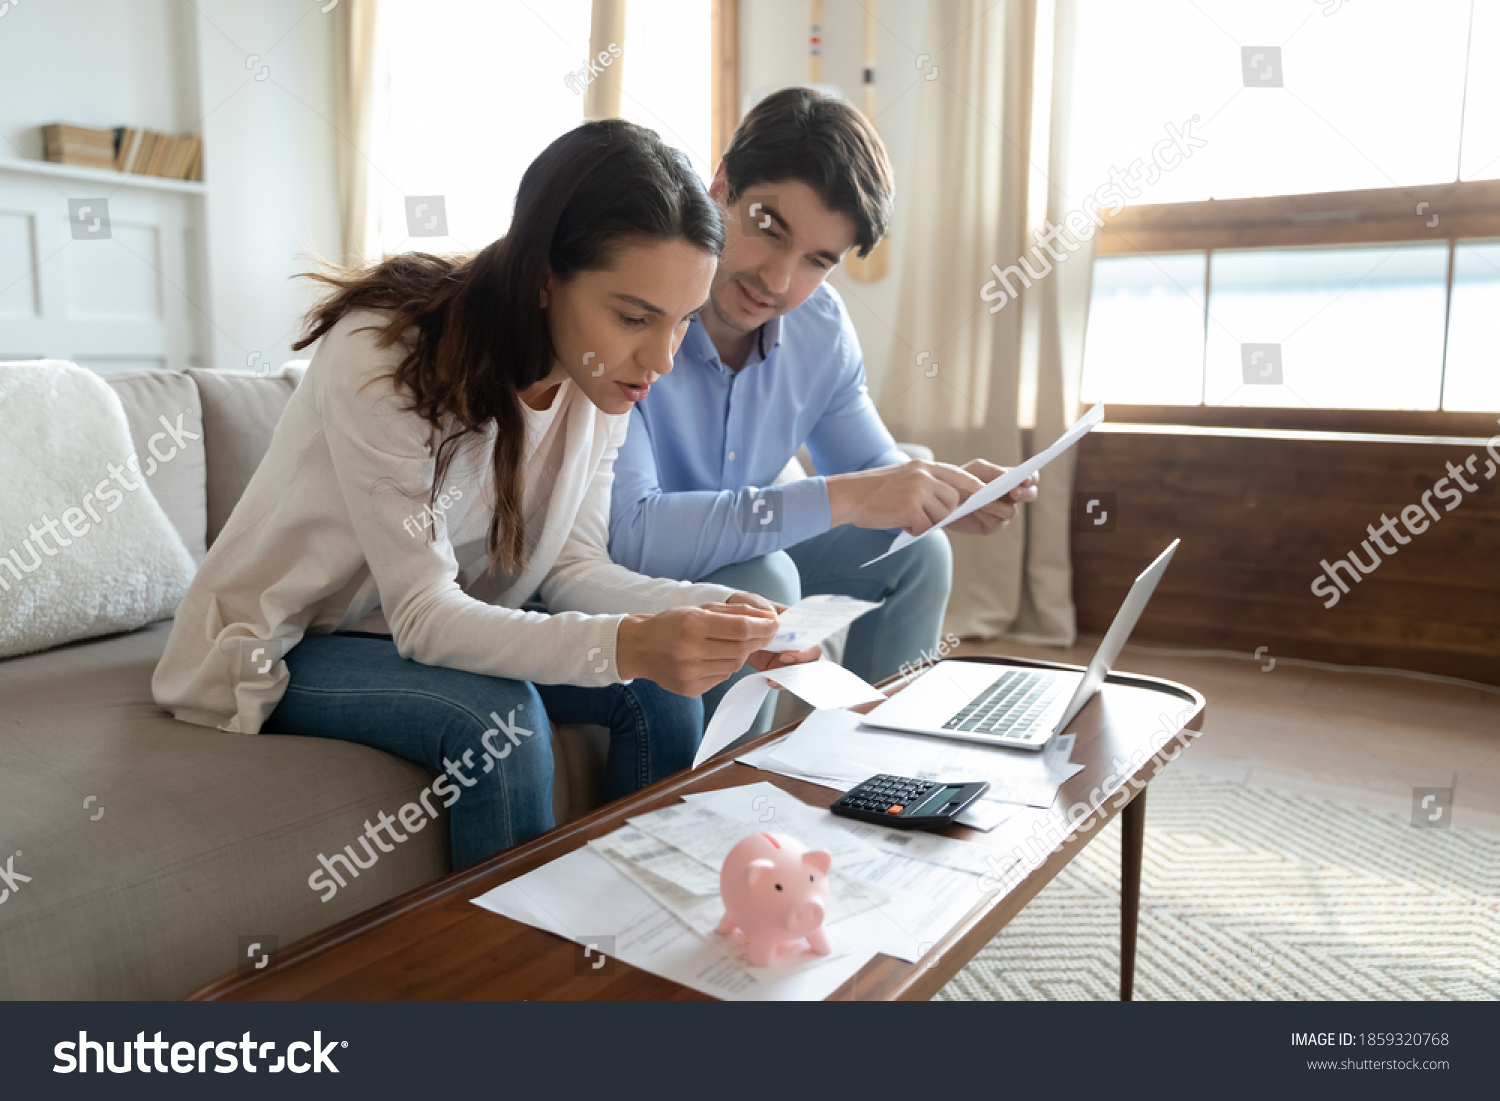 Taking close look at paper. Concentrated attentive millennial couple sitting at home office in living room involved in reading documents preparing to provide loan mortgage utility bills payment online #1859320768